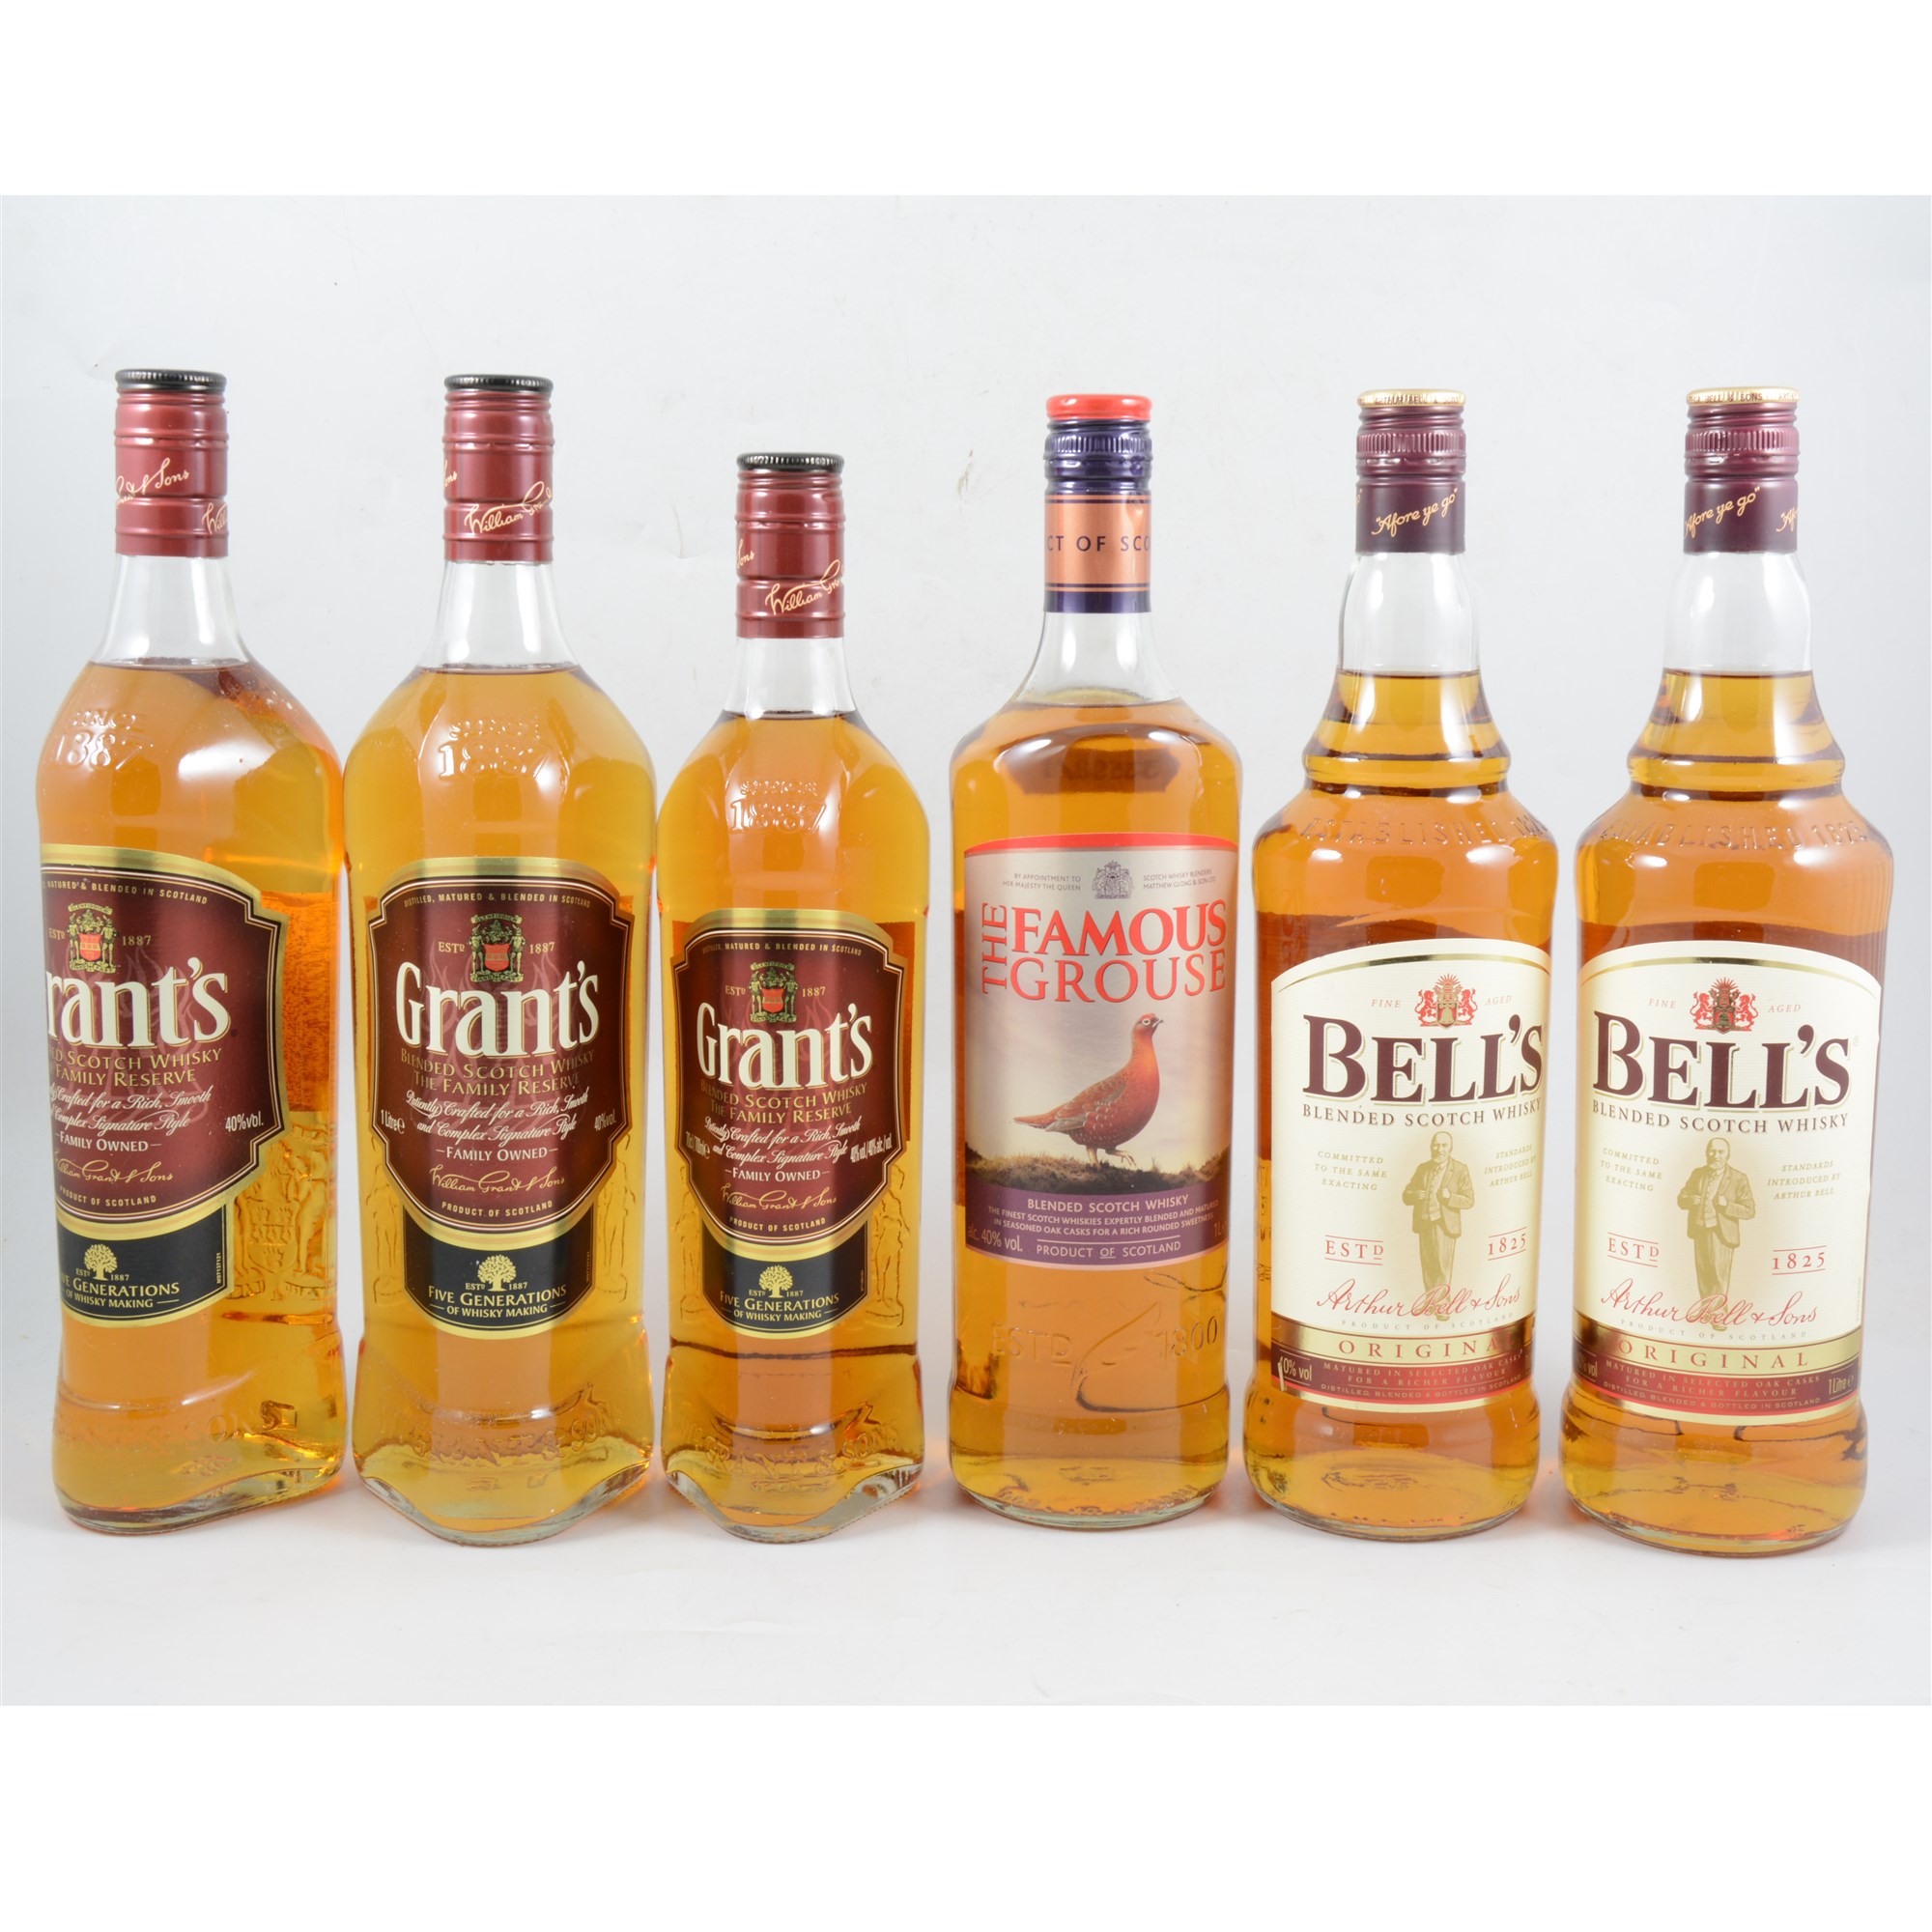 Six bottles of blended Scotch whisky, comprising Grant's, Bell's and Famous Grouse